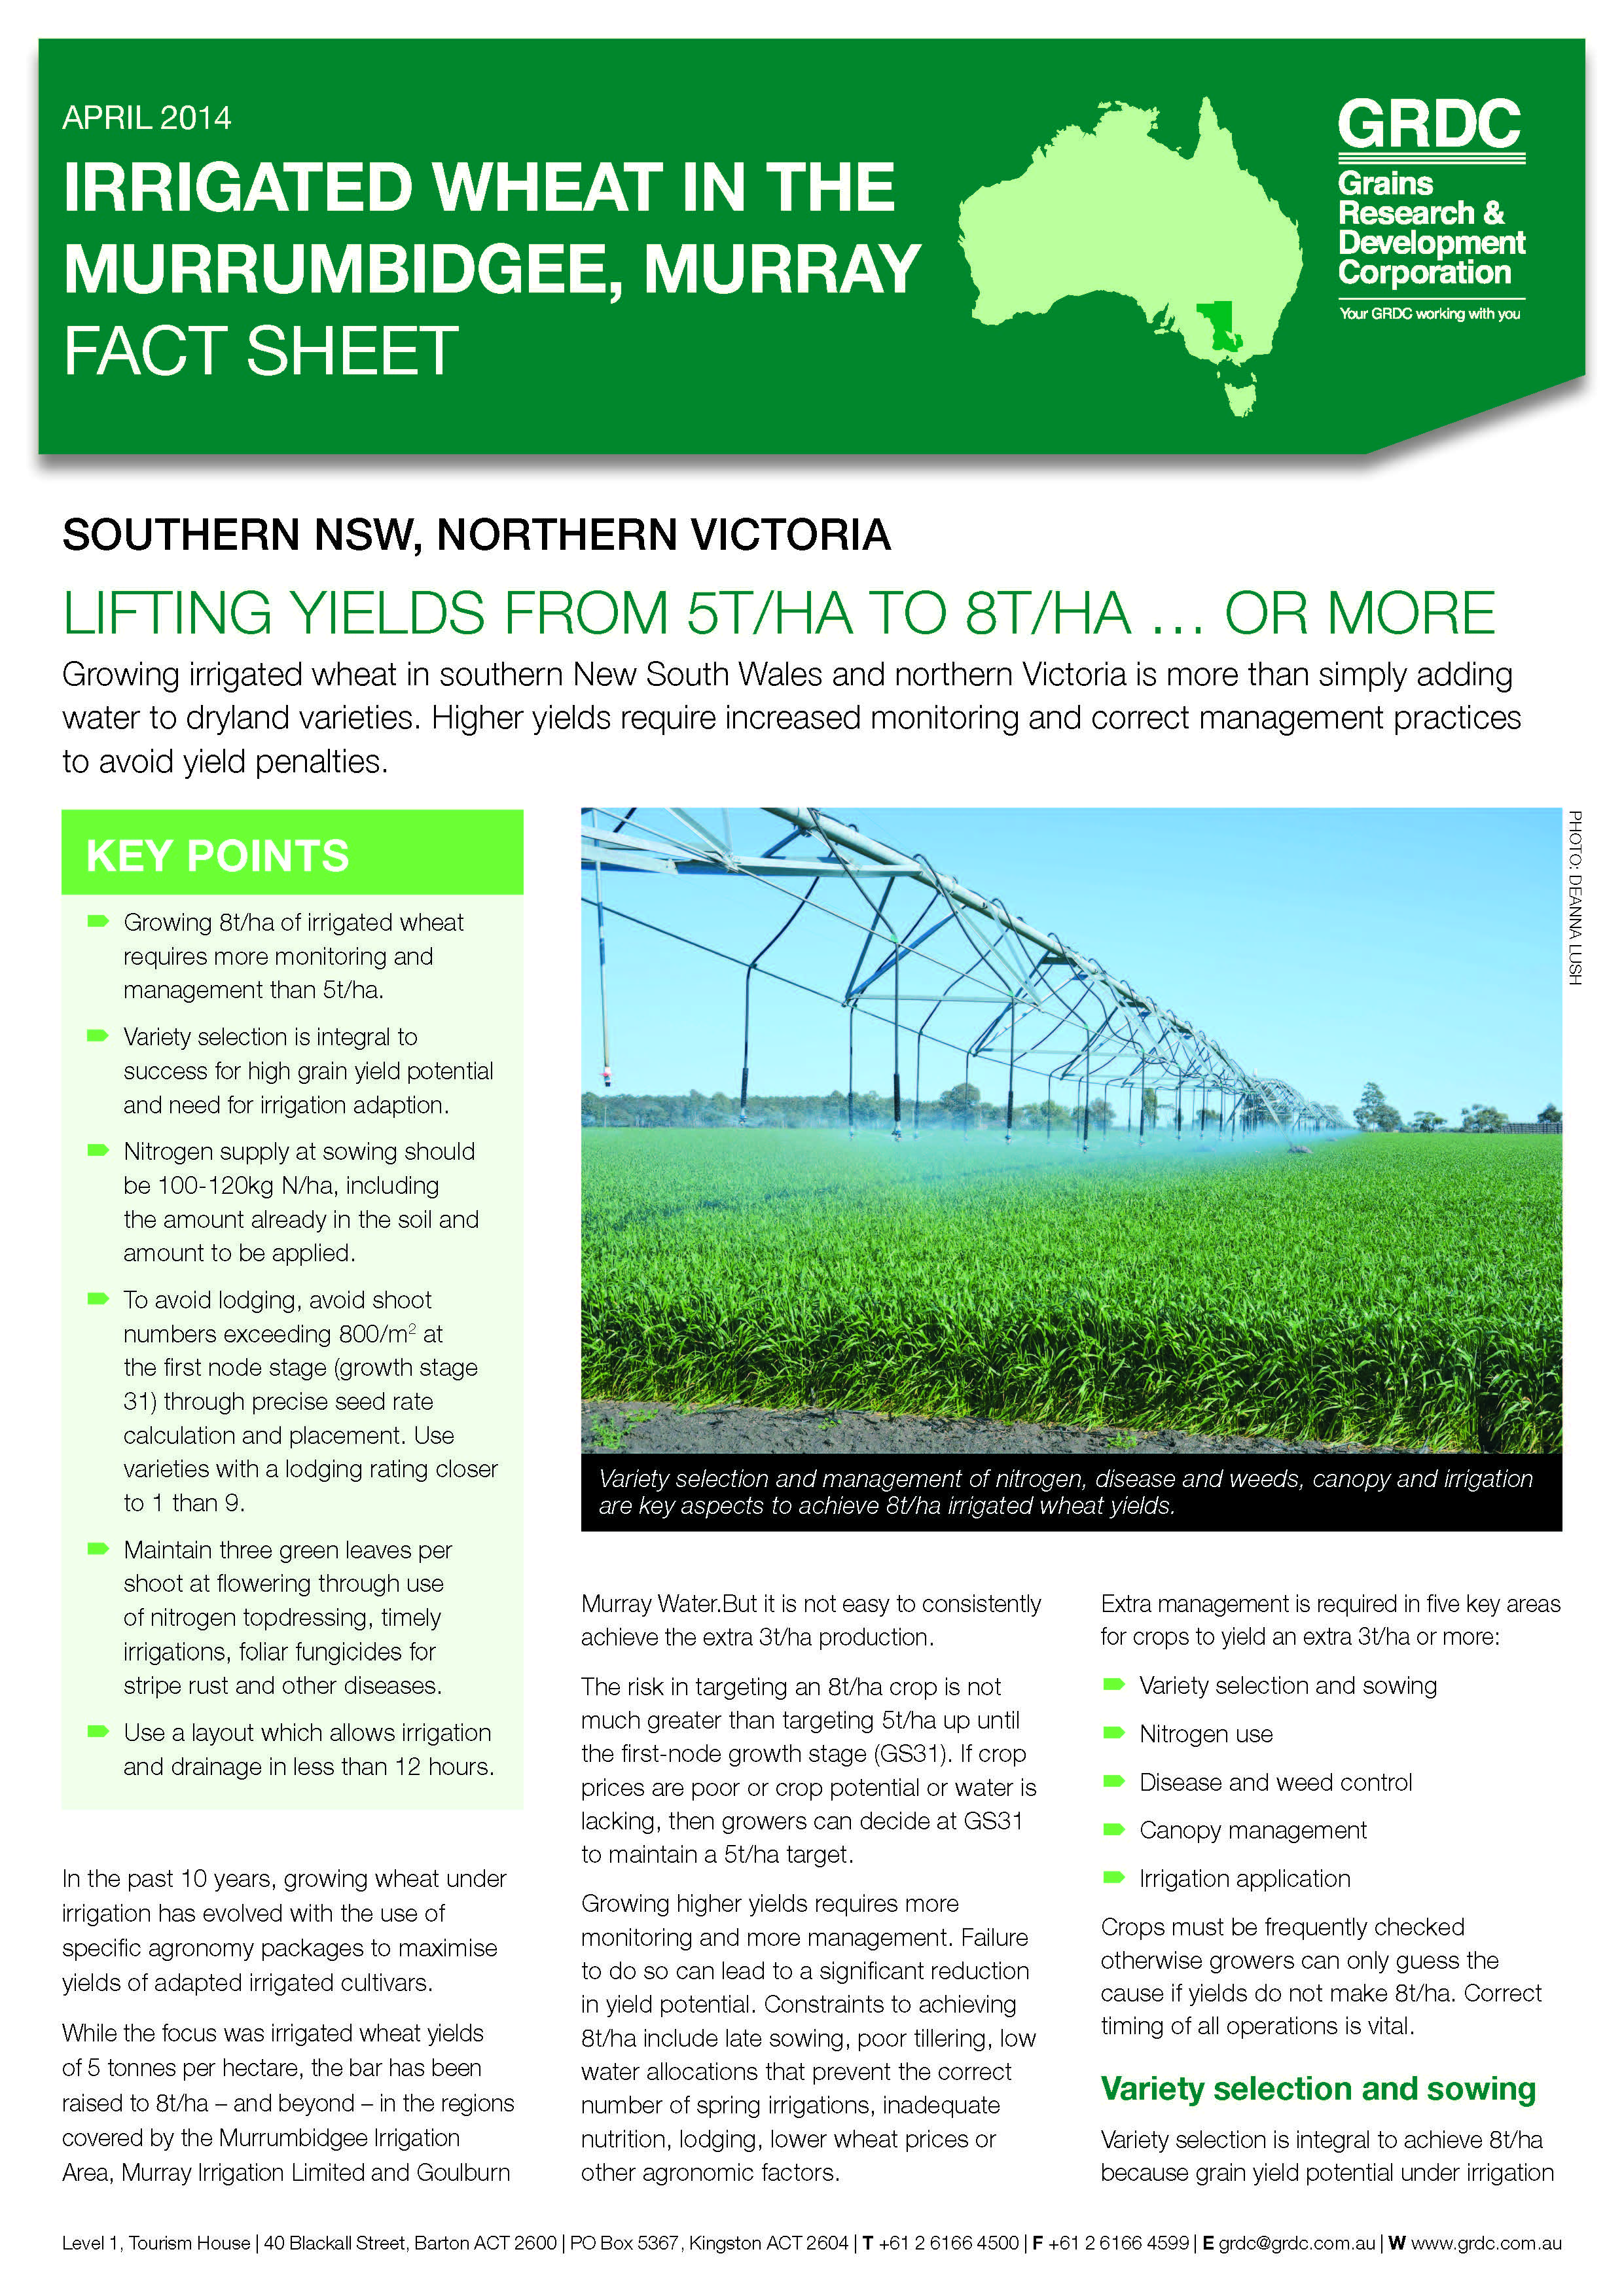 Cover image of the GRDC Irrigated Wheat in the Murrumbidgee and Murray Fact Sheet